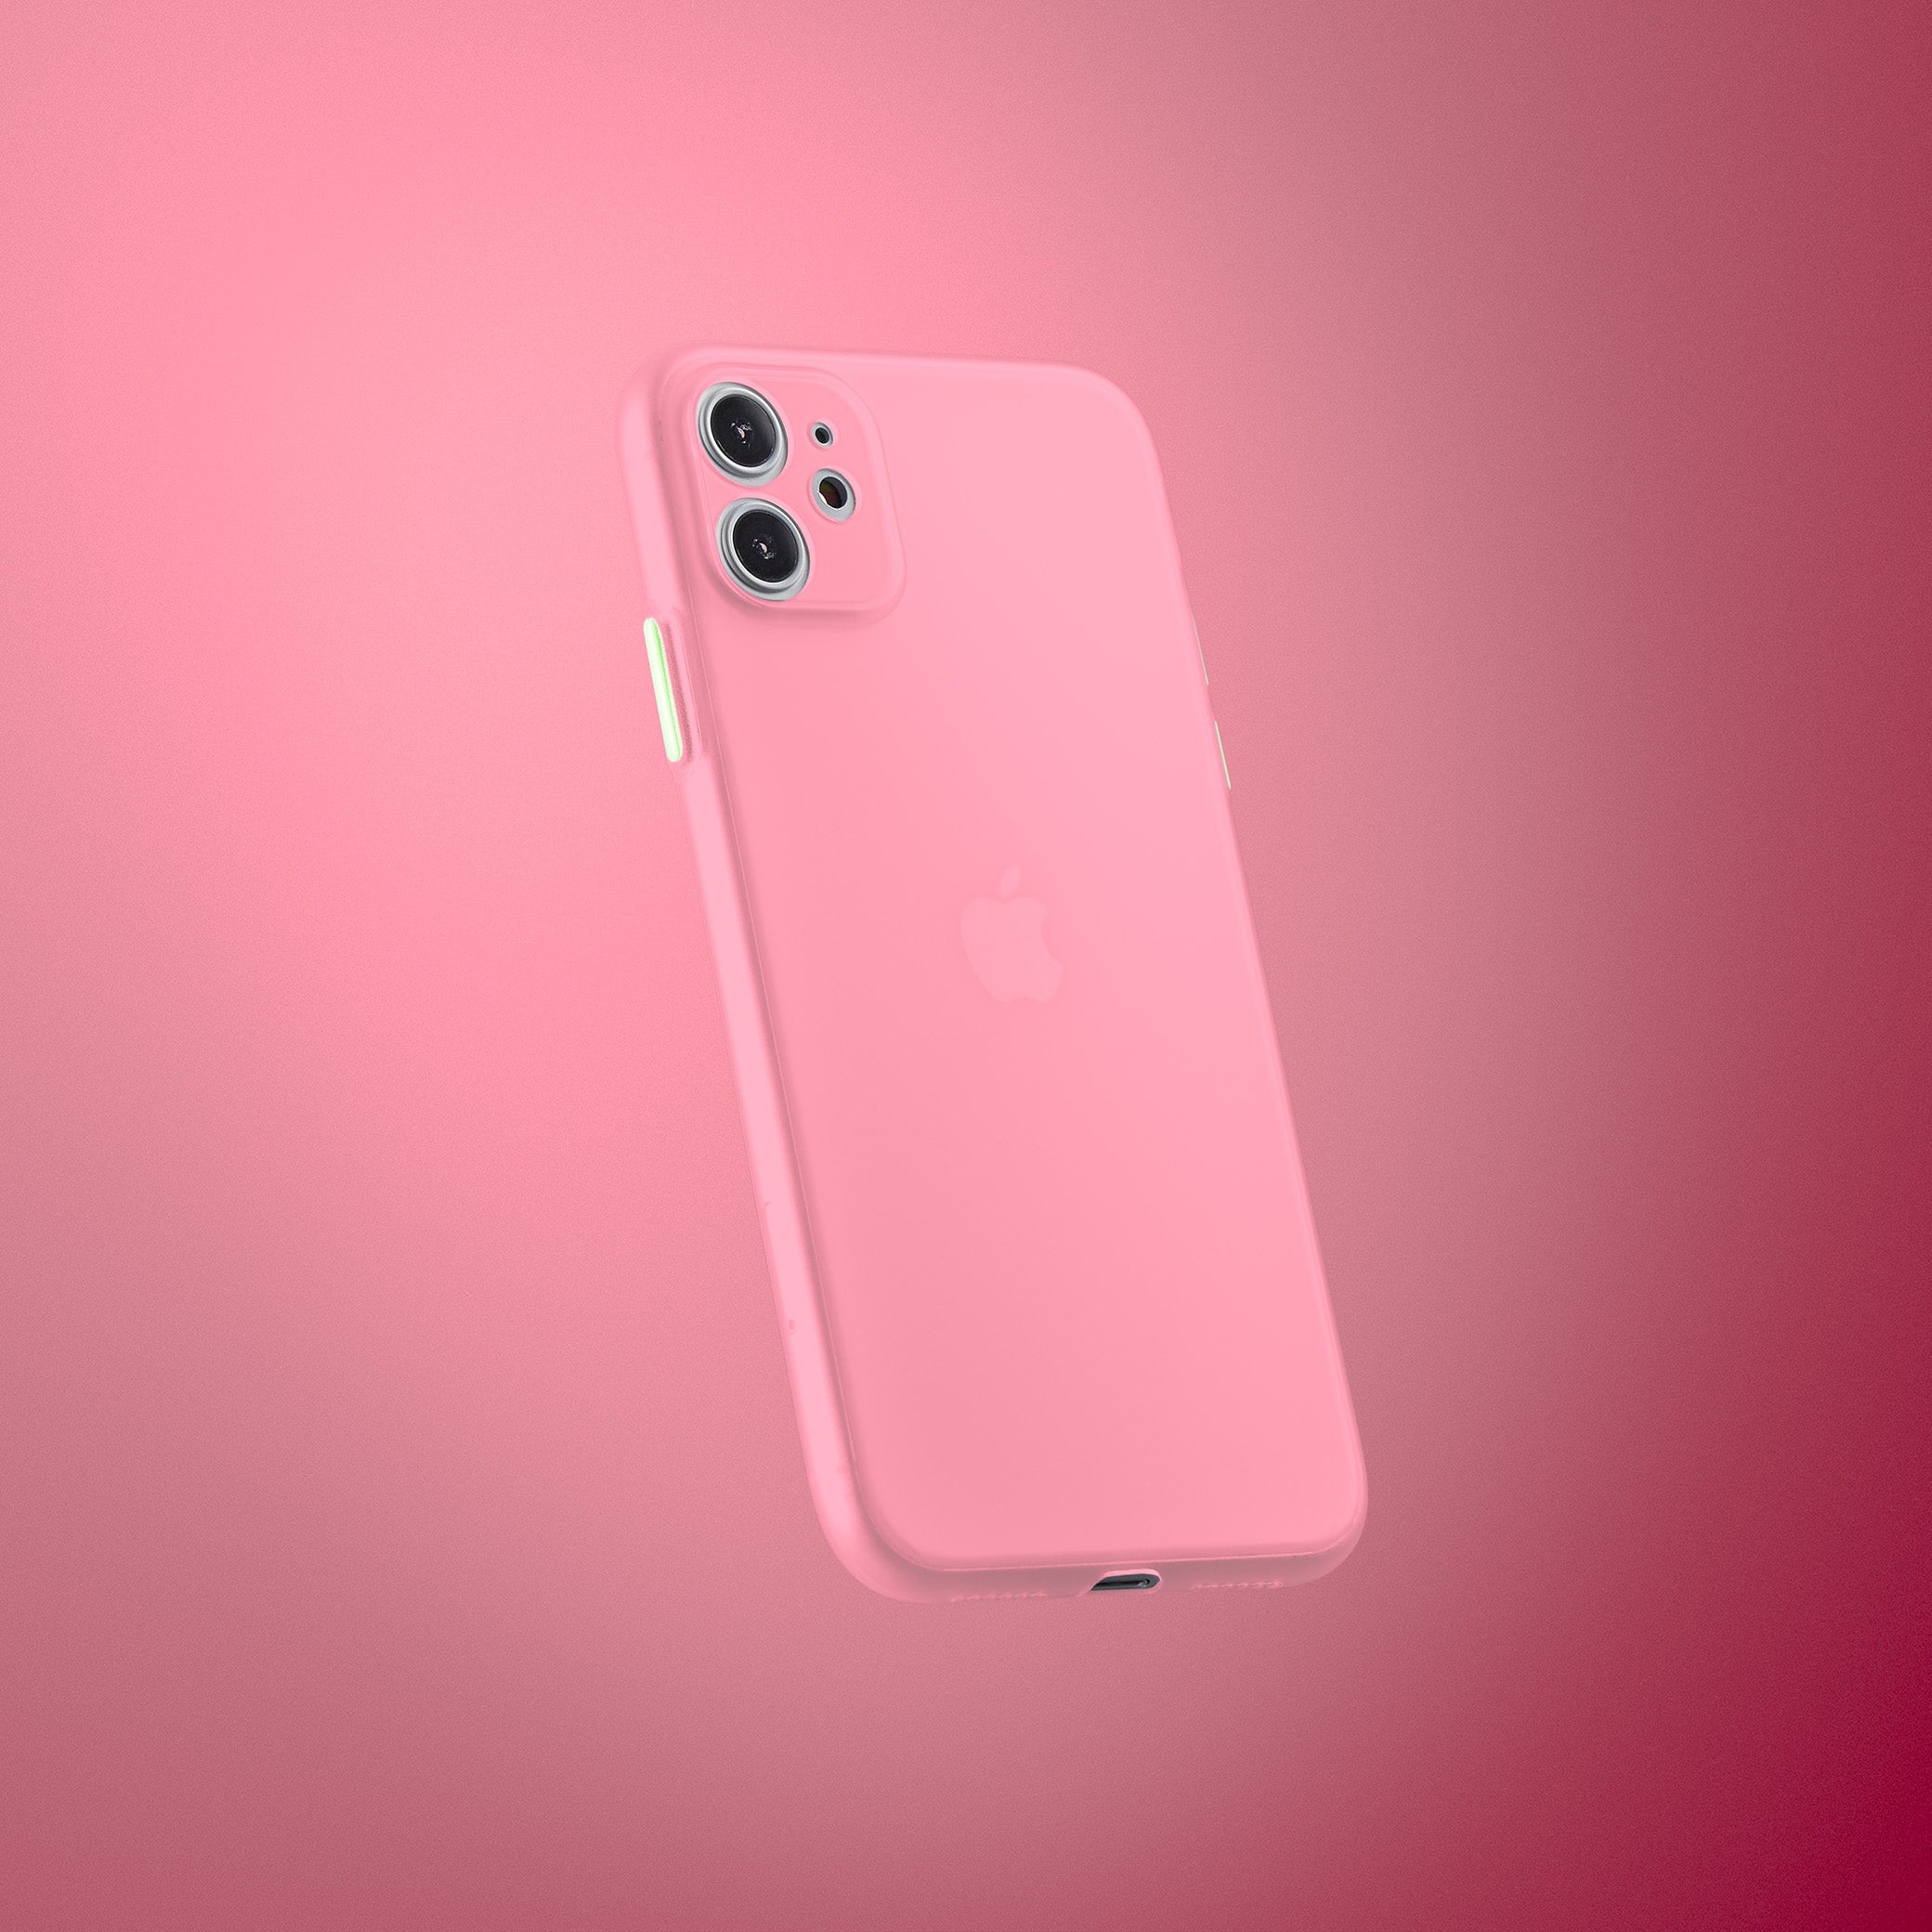 Super Slim Case 2.0 for iPhone 11 - Pink Cotton Candy